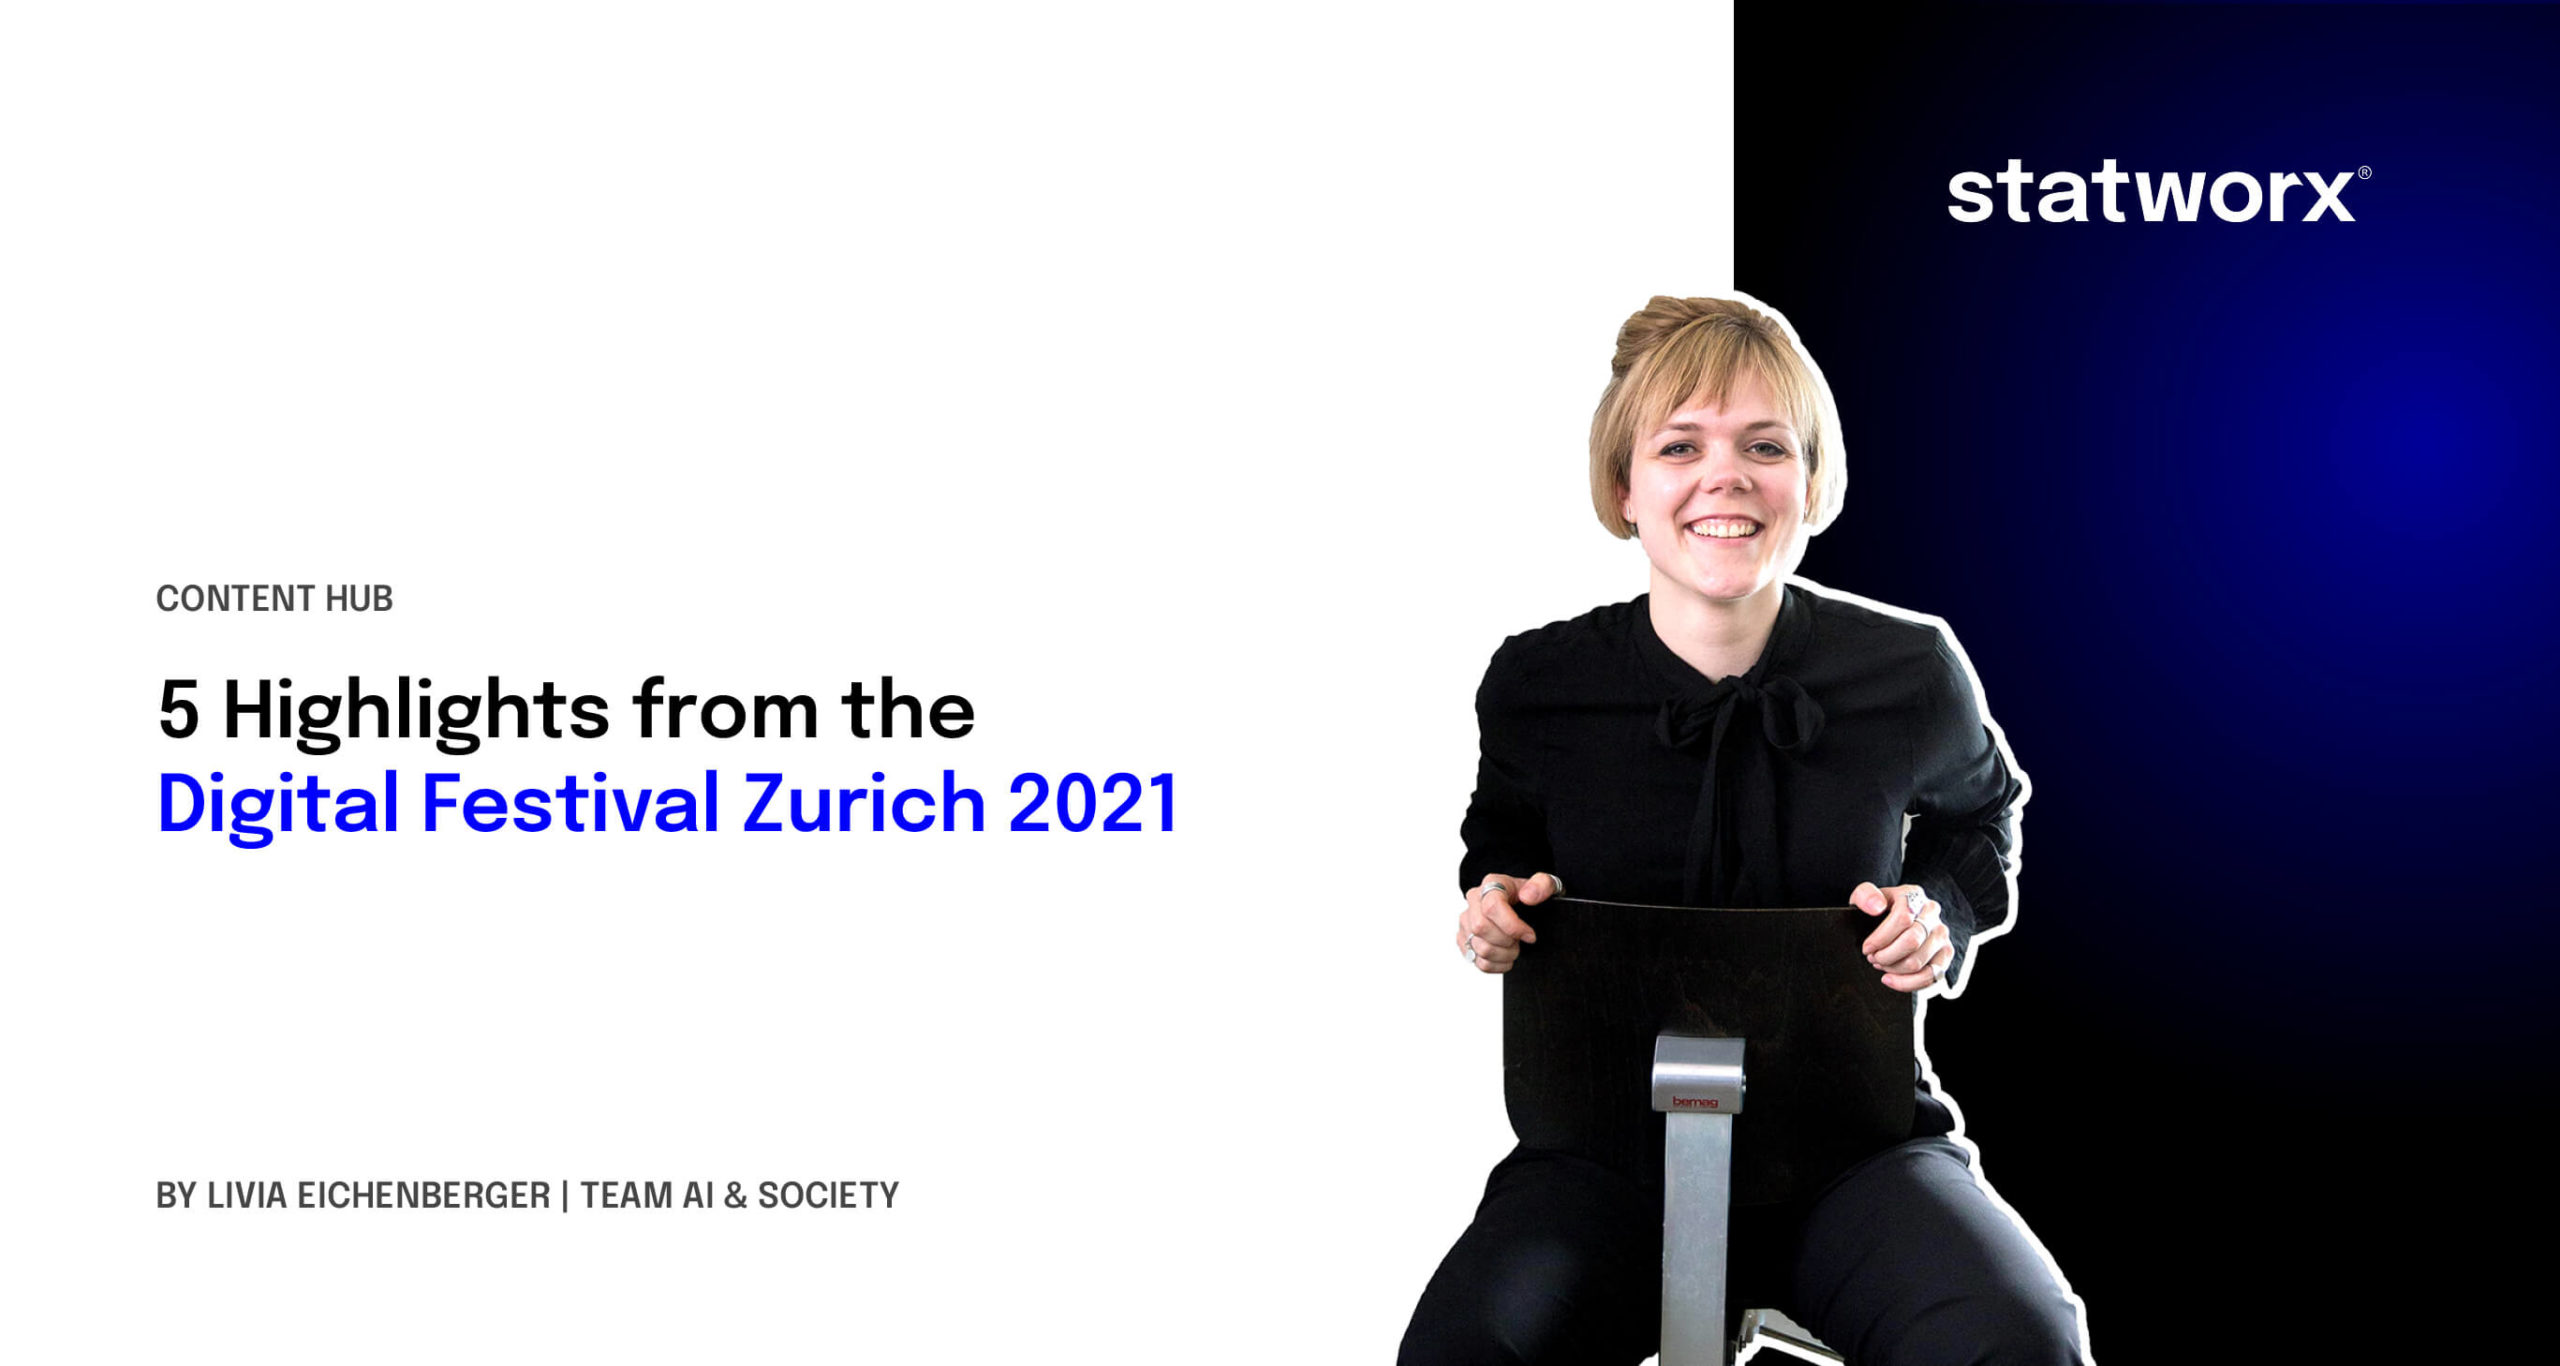 5 Highlights from the Digital Festival Zurich 2021